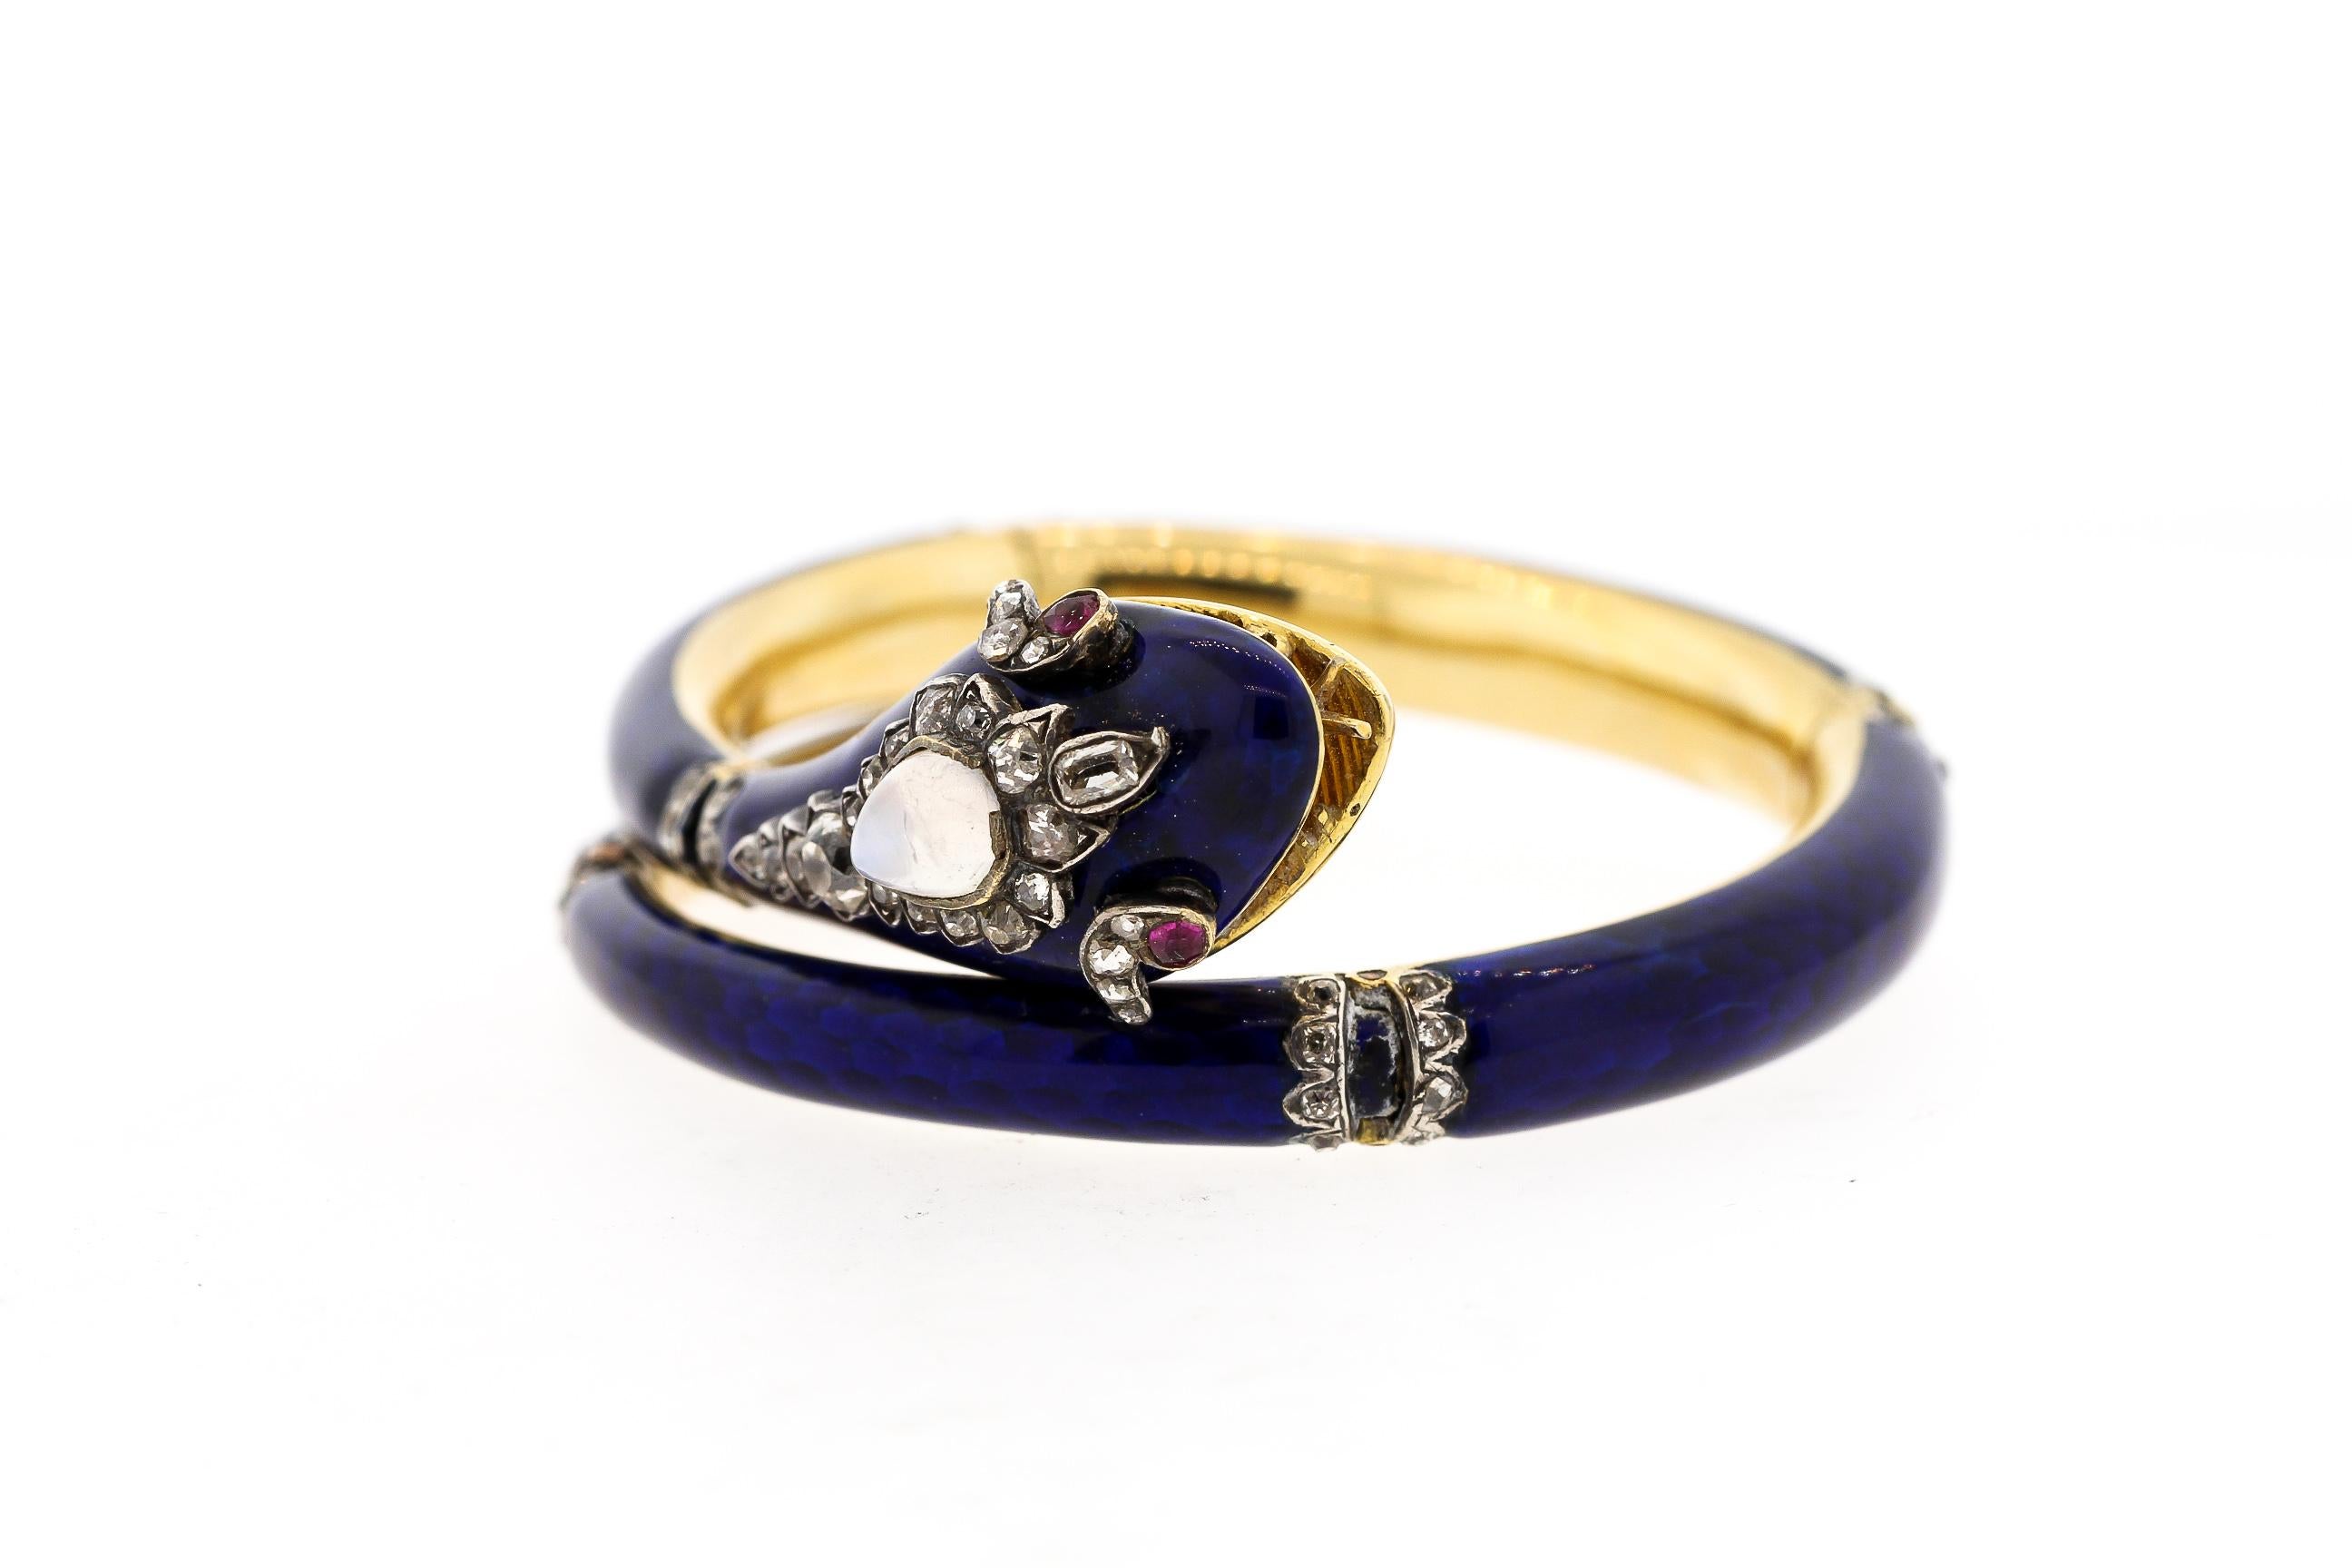 Lovely antique Victorian dark blue enamel articulated snake bracelet that wraps around the wrist, circa 1880. It is made in 18k gold with silver accents, and has a small place for memento underneath the head. The snake is set with rose cut diamonds